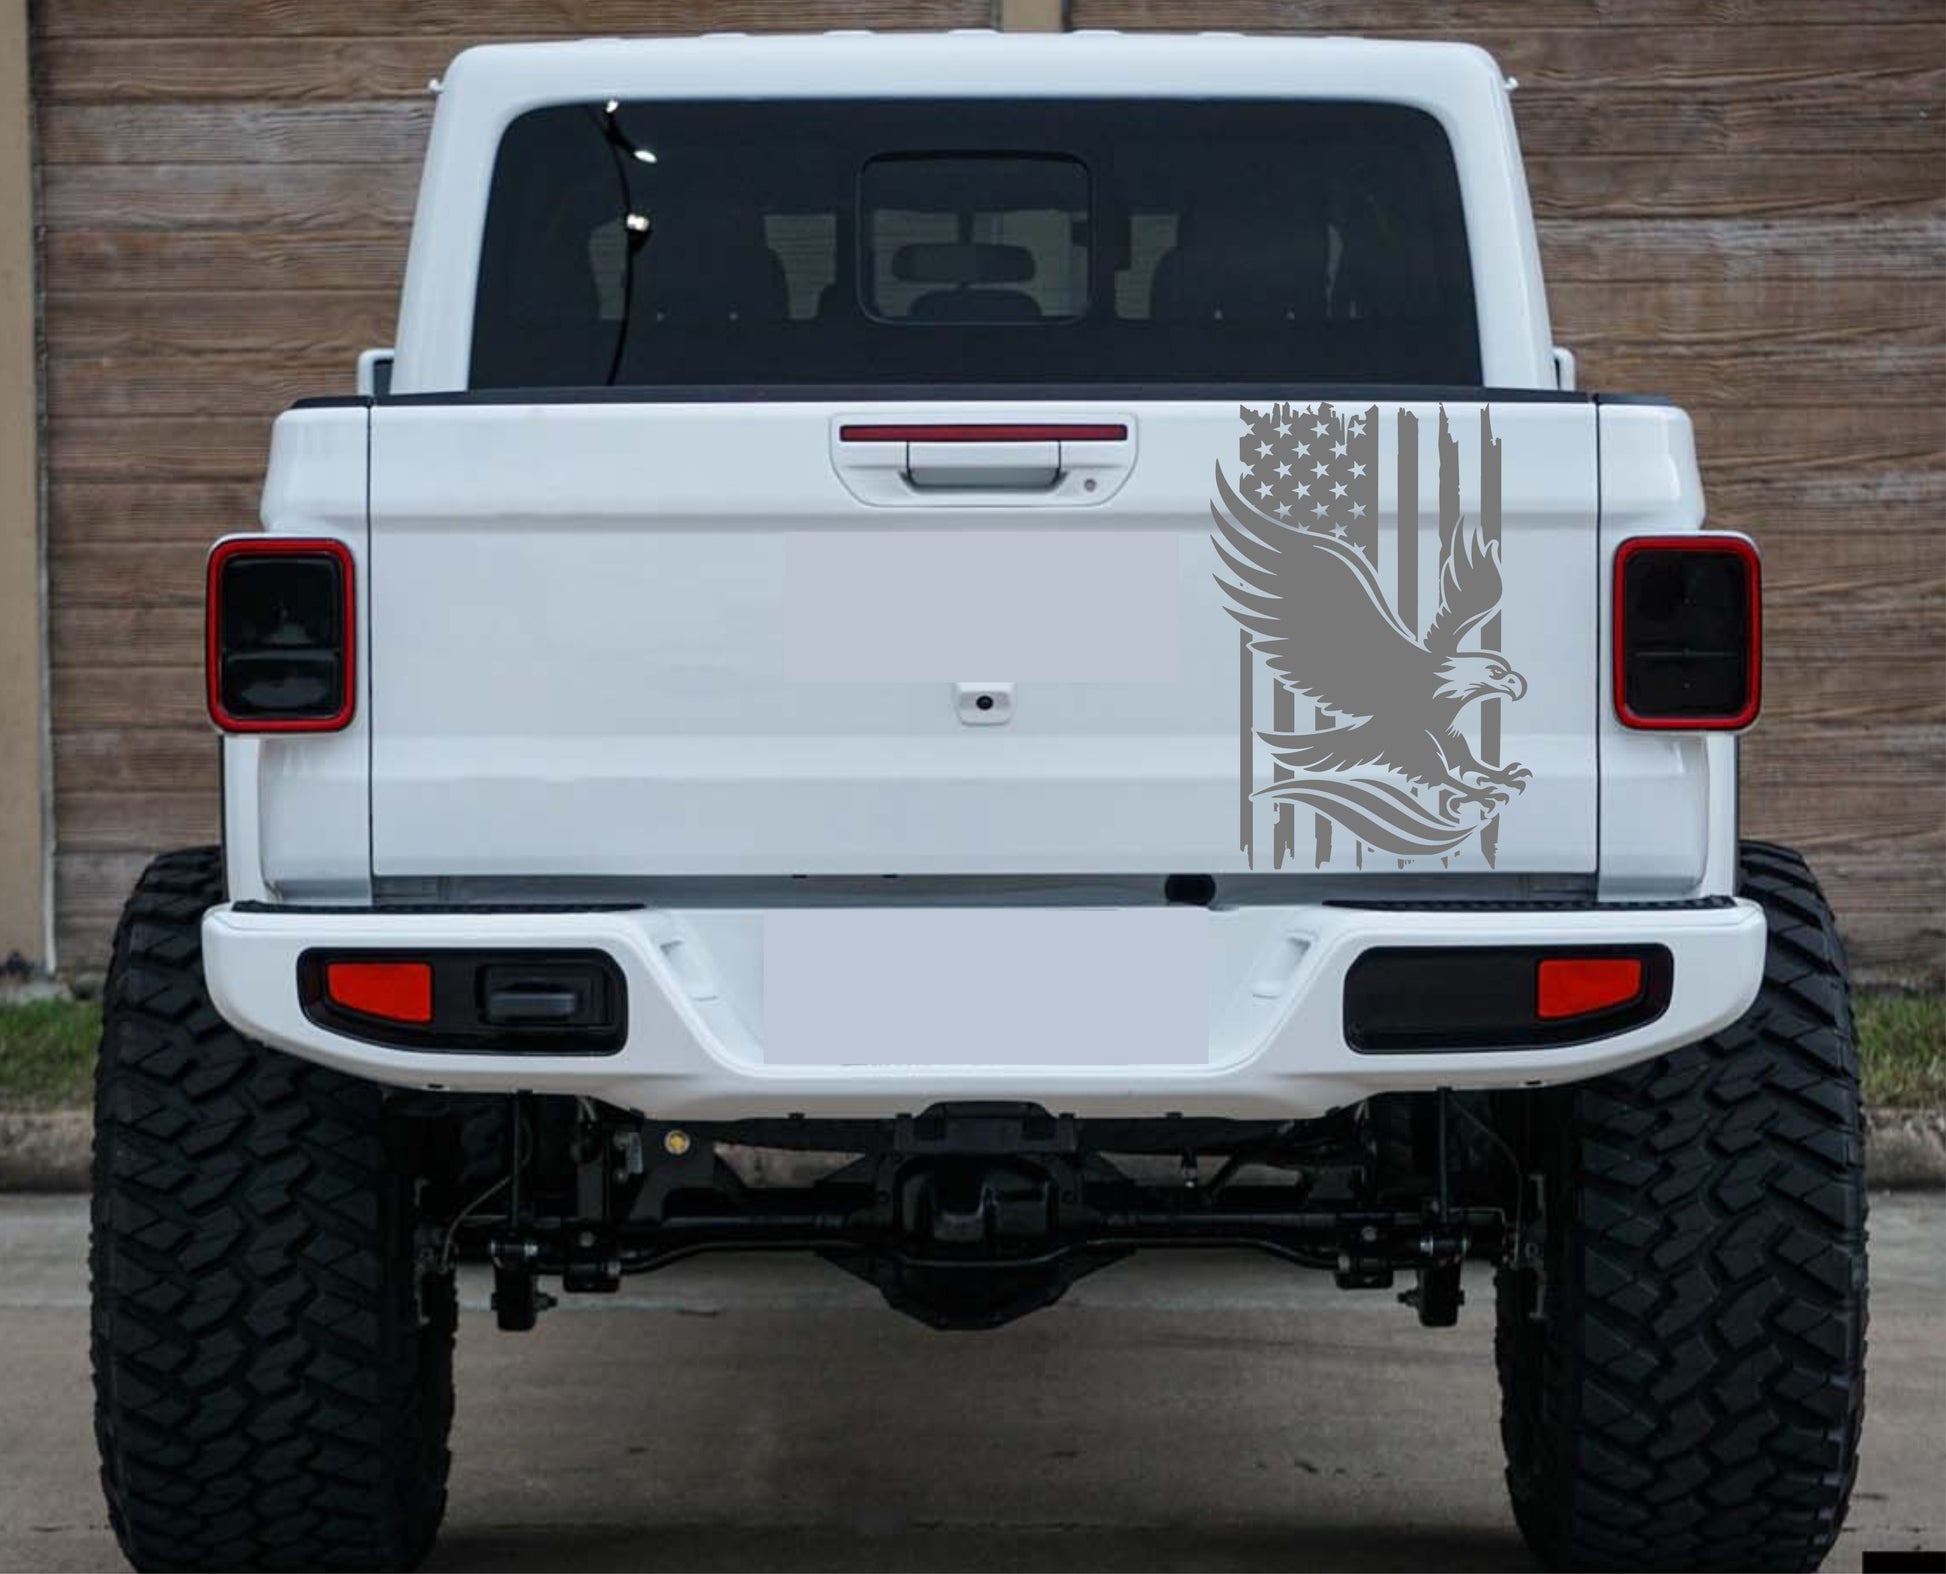 american flag american eagle car sticker fits jeep gladiator tailgate